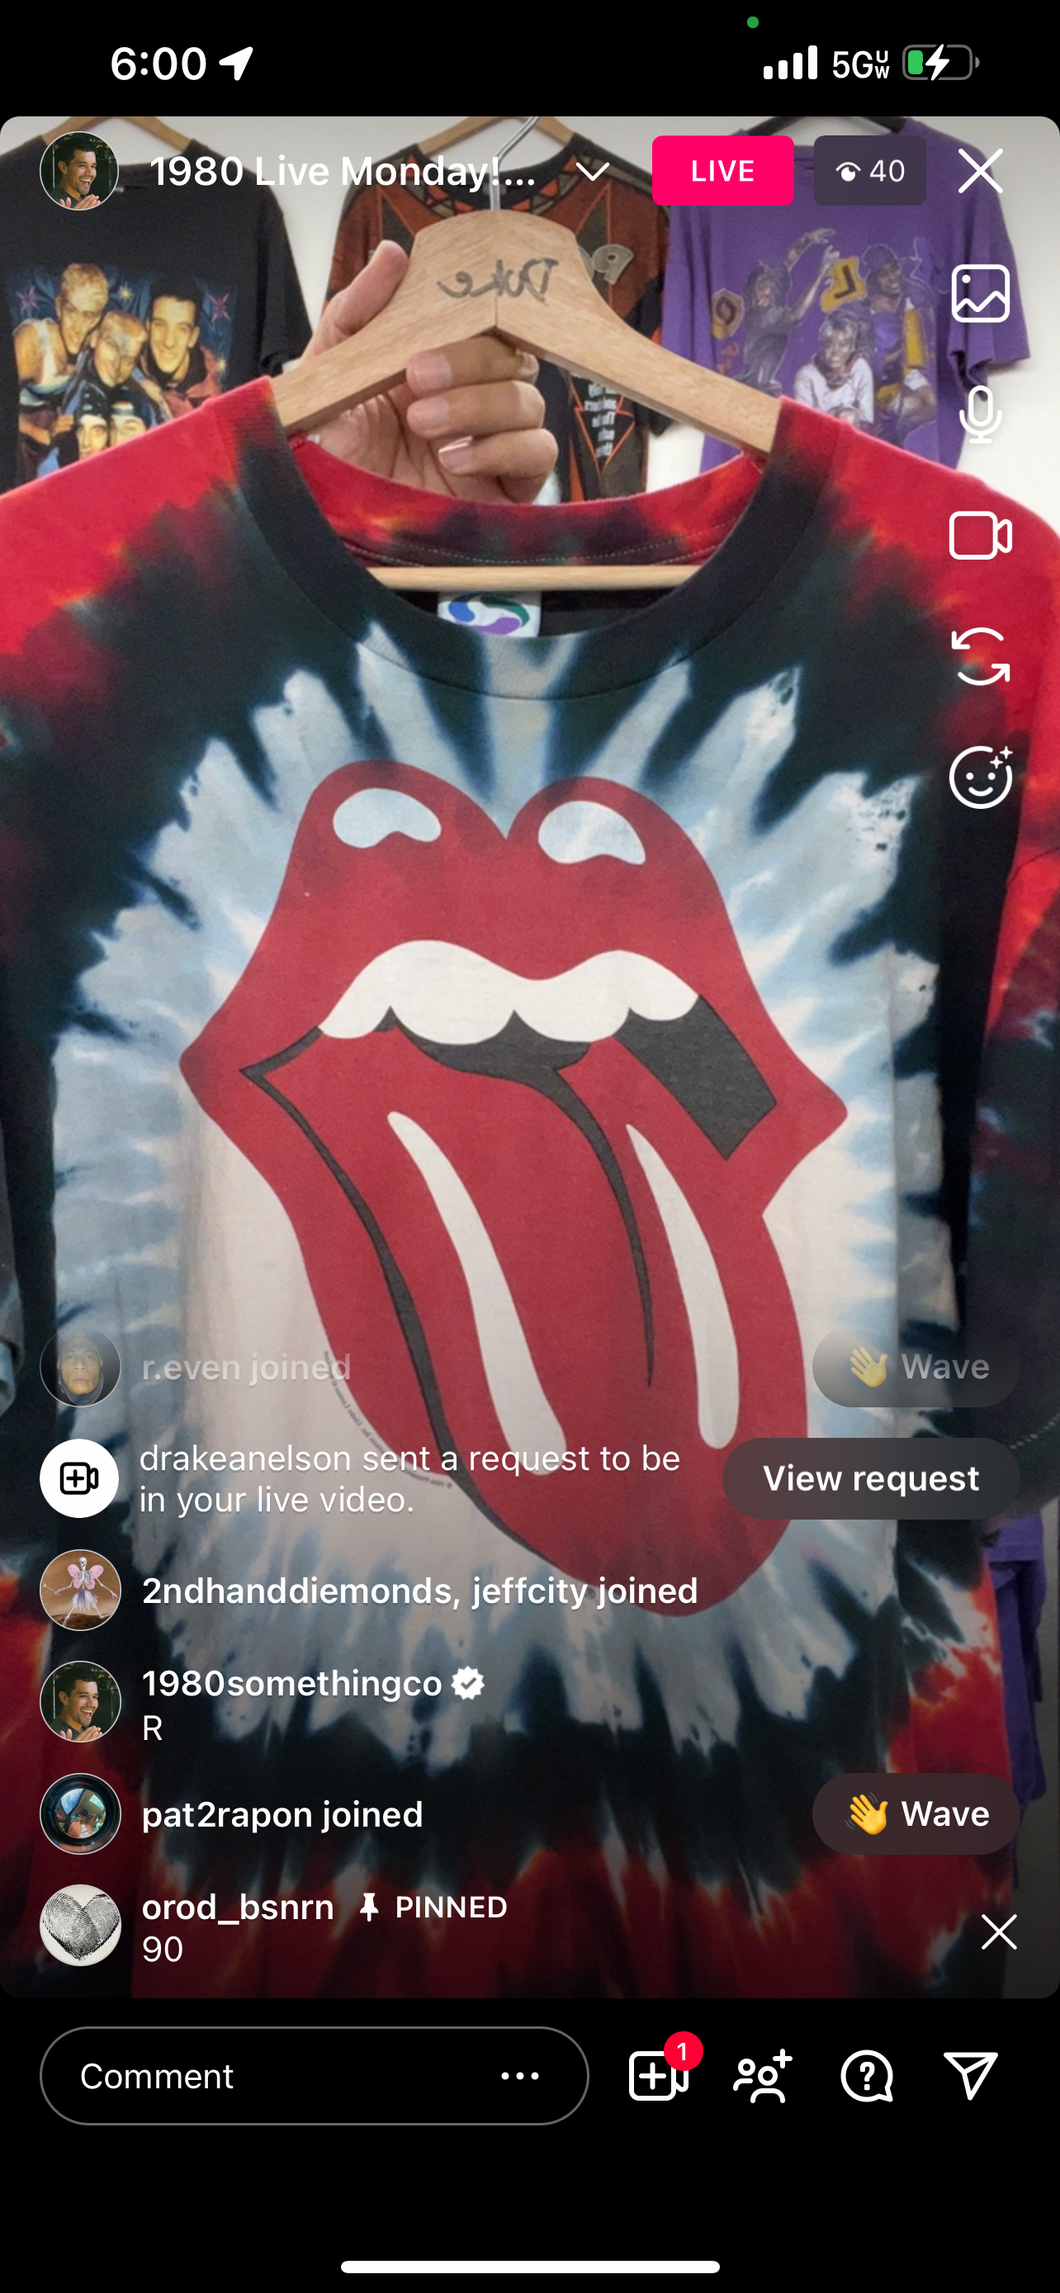 ‘94 Rolling Stones shirt (secondhand)